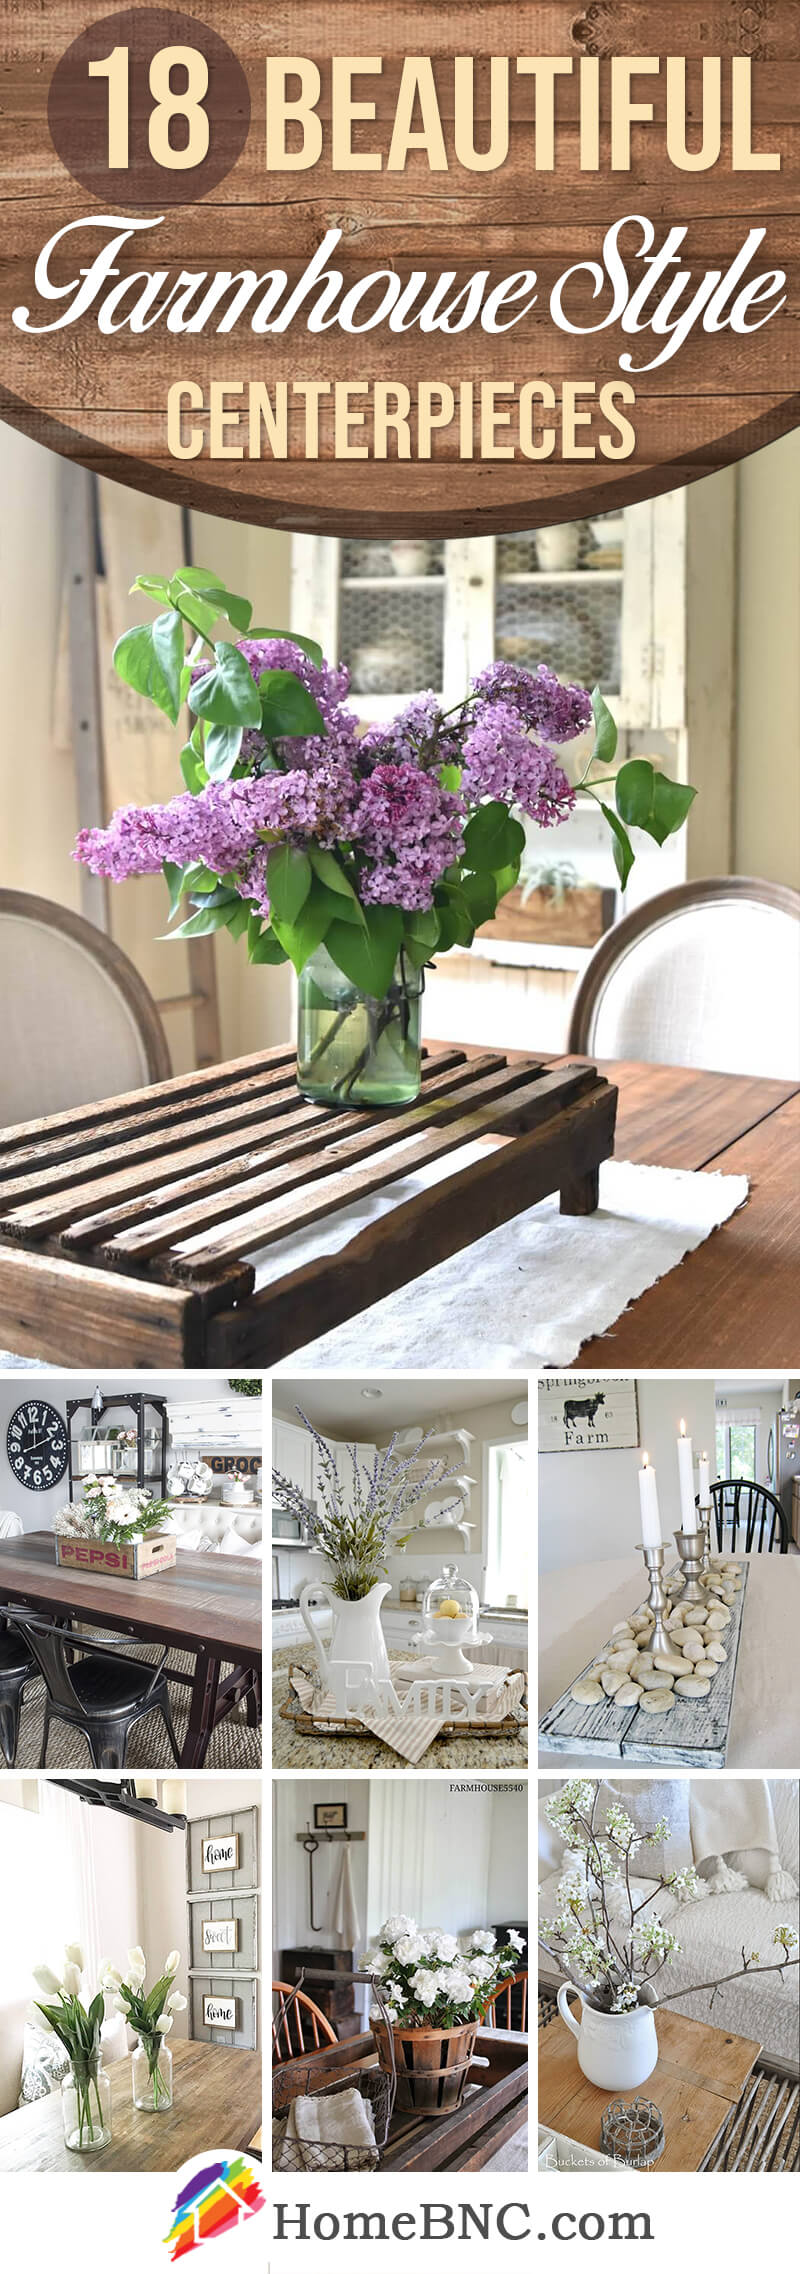 18 Best Farmhouse Style Centerpiece Ideas And Designs For 2021 For any individual who is searching for an antique farmhouse table to add to their accumulation in the lounge area or kitchen, it is constantly best to first discover more data about the thing before settling on a choice to… farmhouse style centerpiece ideas